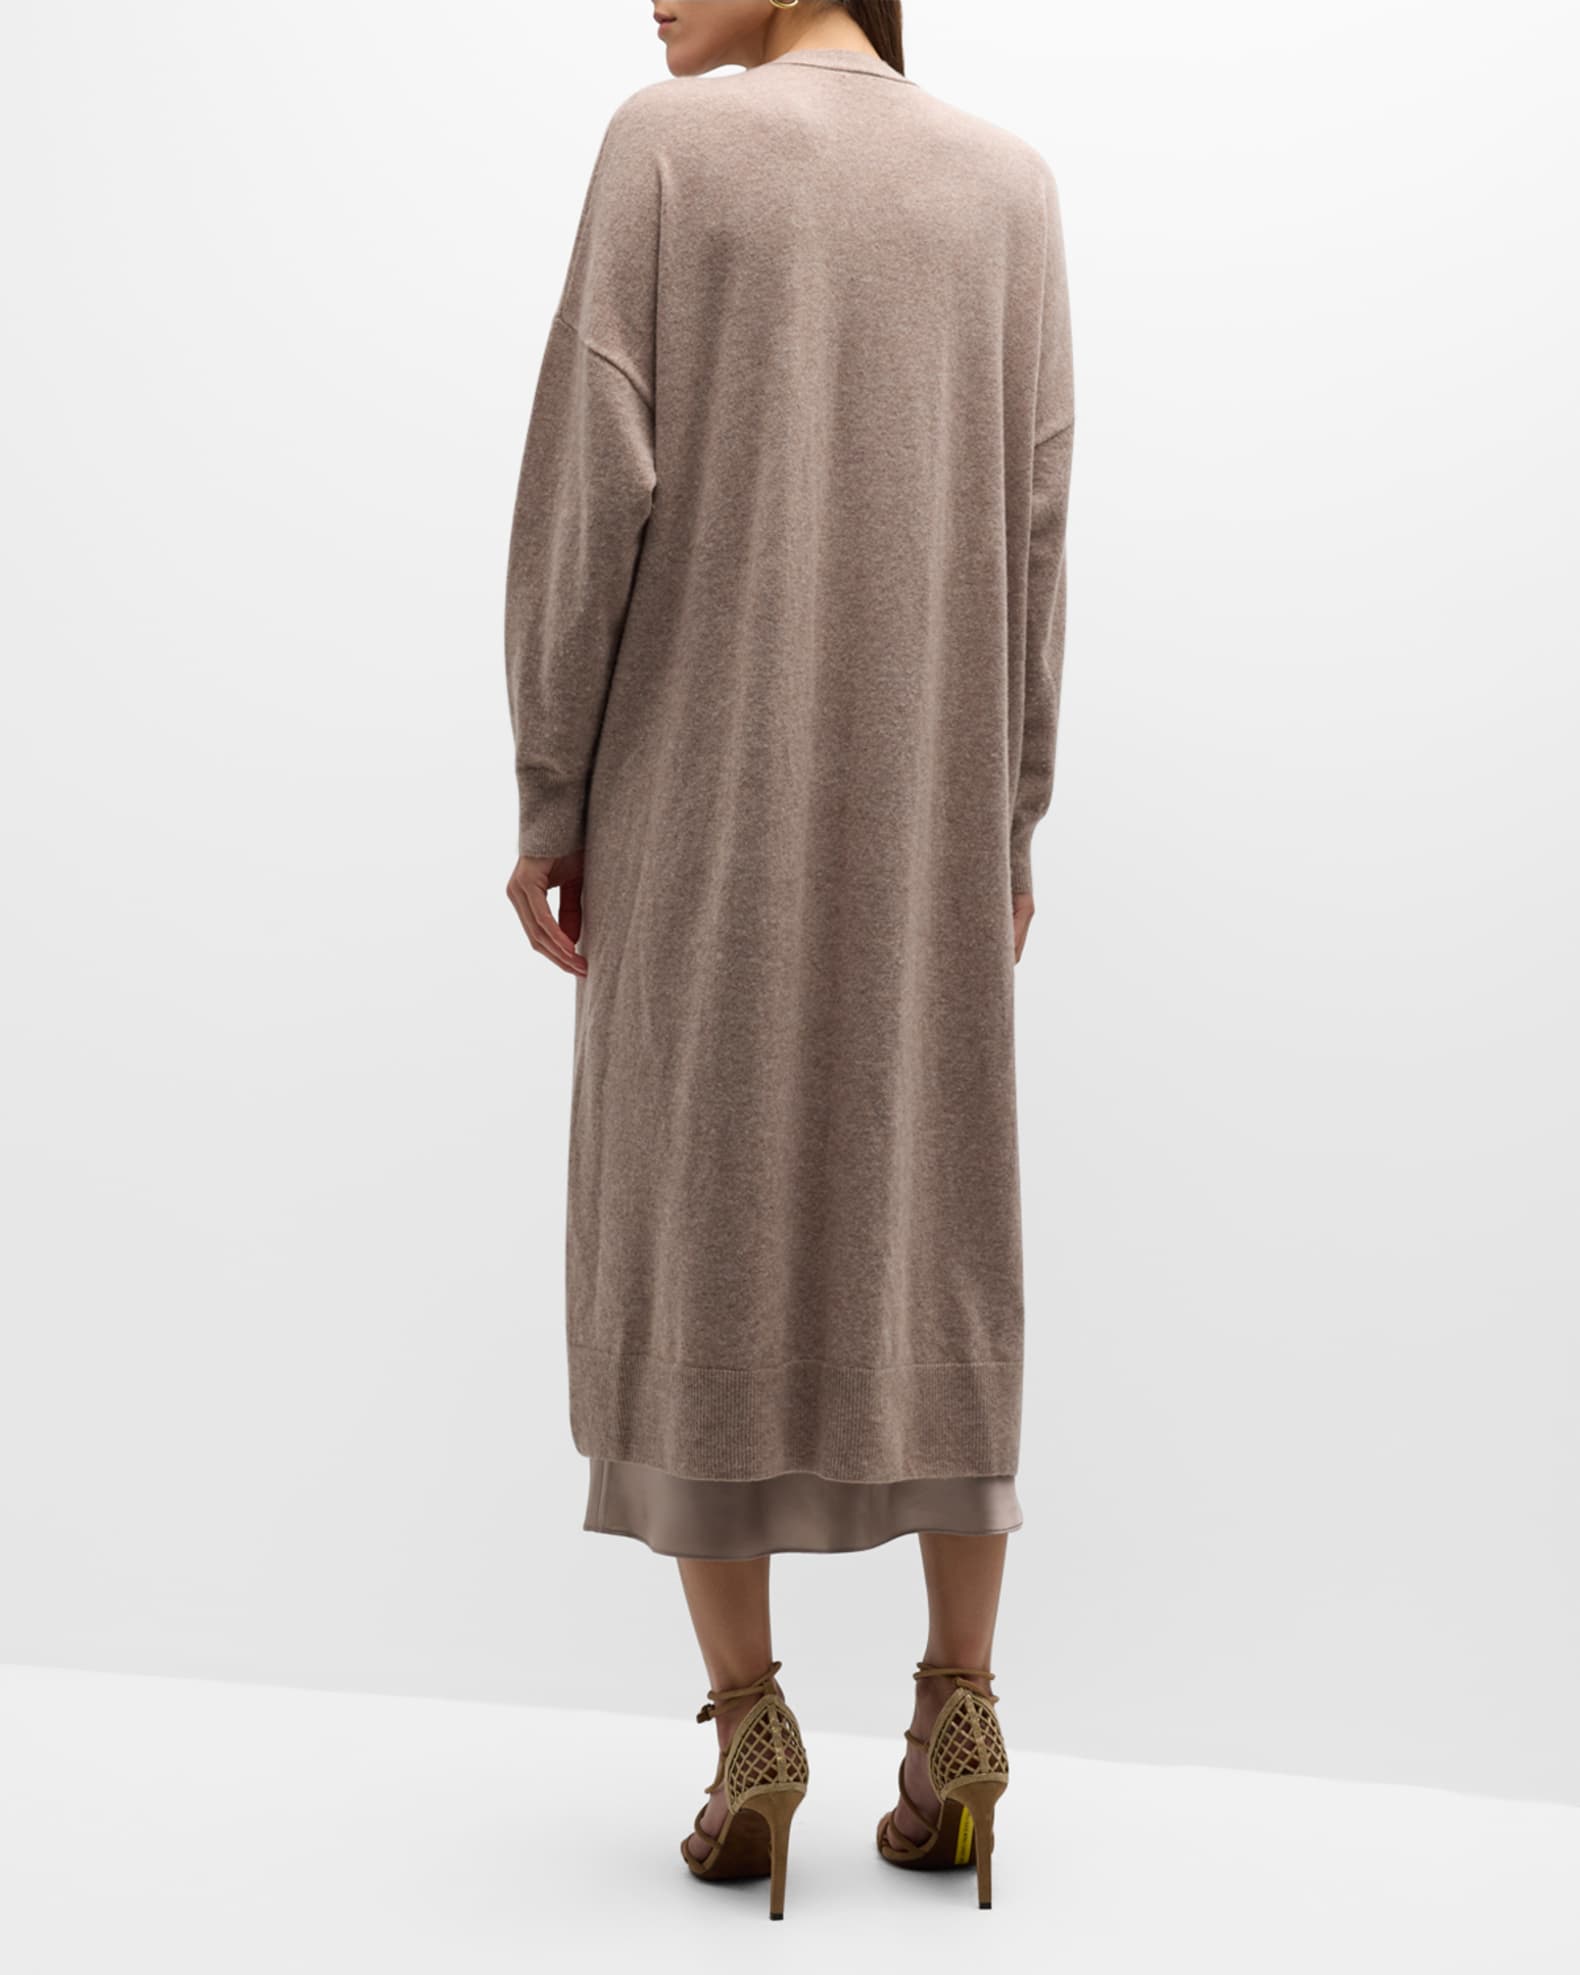 Sablyn Cashmere Duster | Neiman Marcus